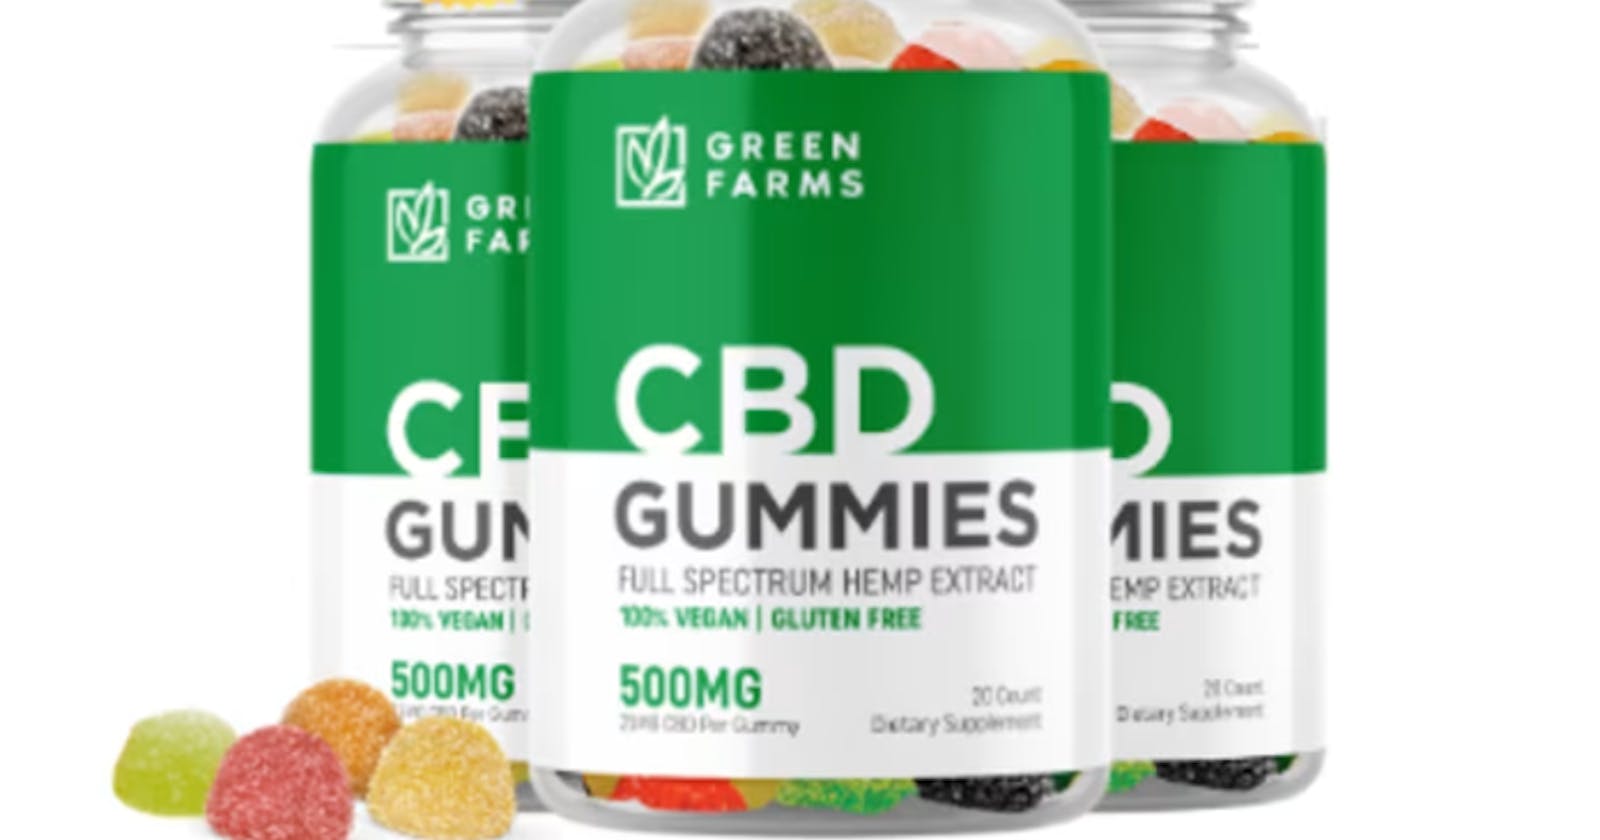 Green Farms CBD Gummies Reviews Scam Alert! Don’t Take Before Know This